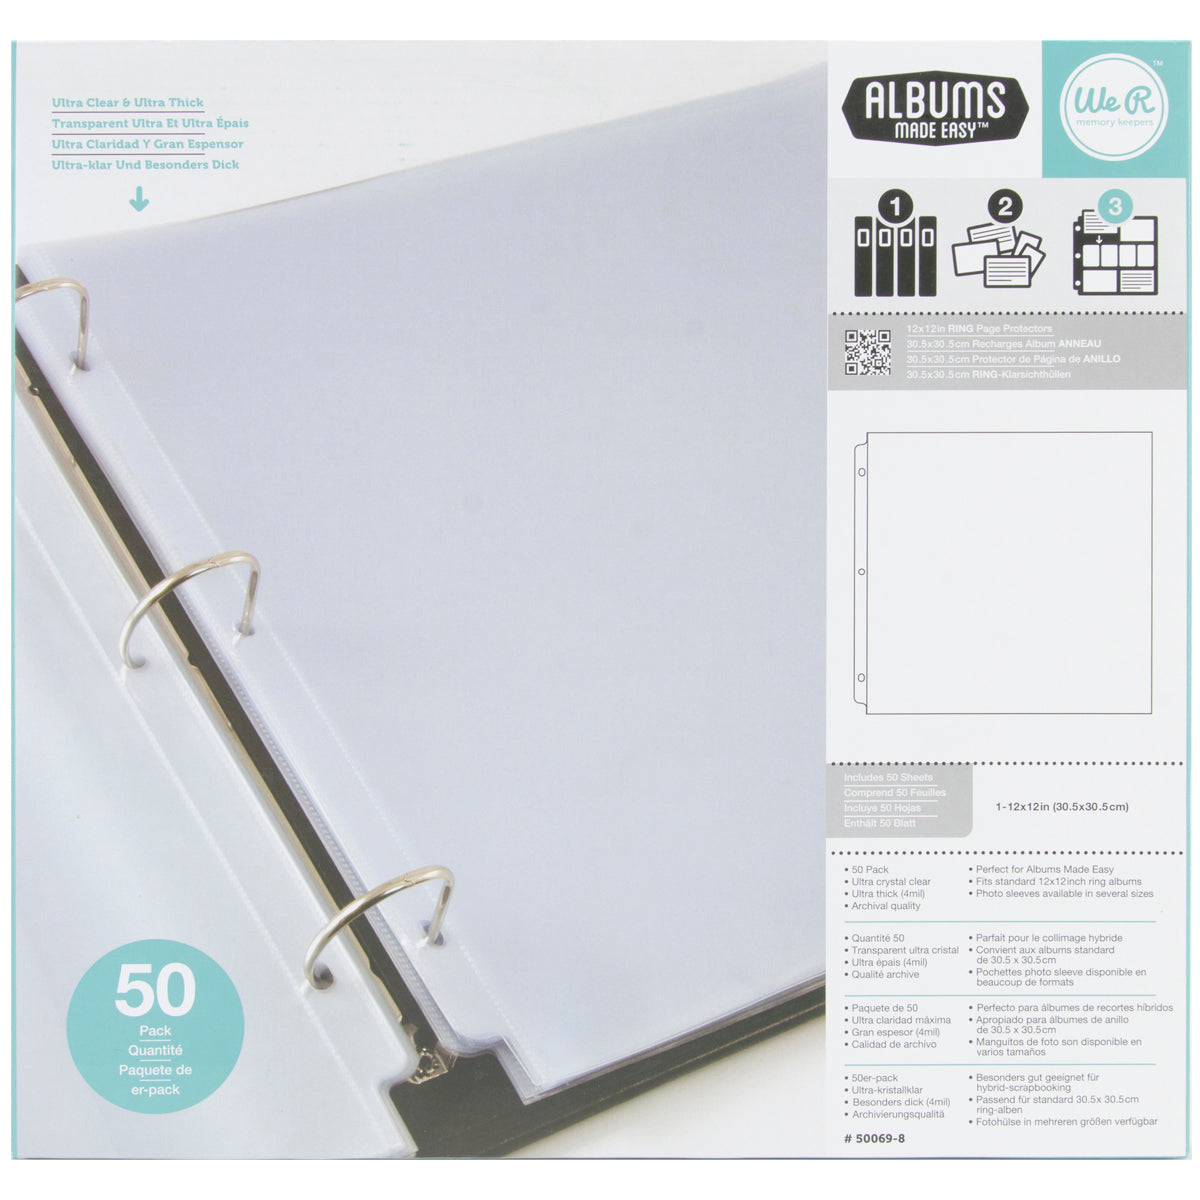 We R Ring Photo Sleeves 12x12 50-pkg-full Page